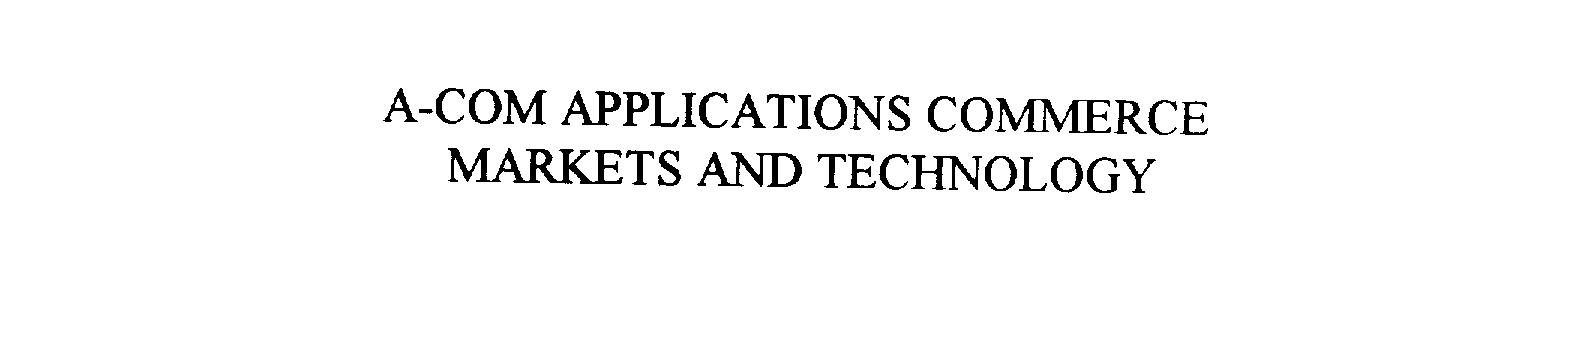  A-COM APPLICATIONS COMMERCE MARKETS AND TECHNOLOGY